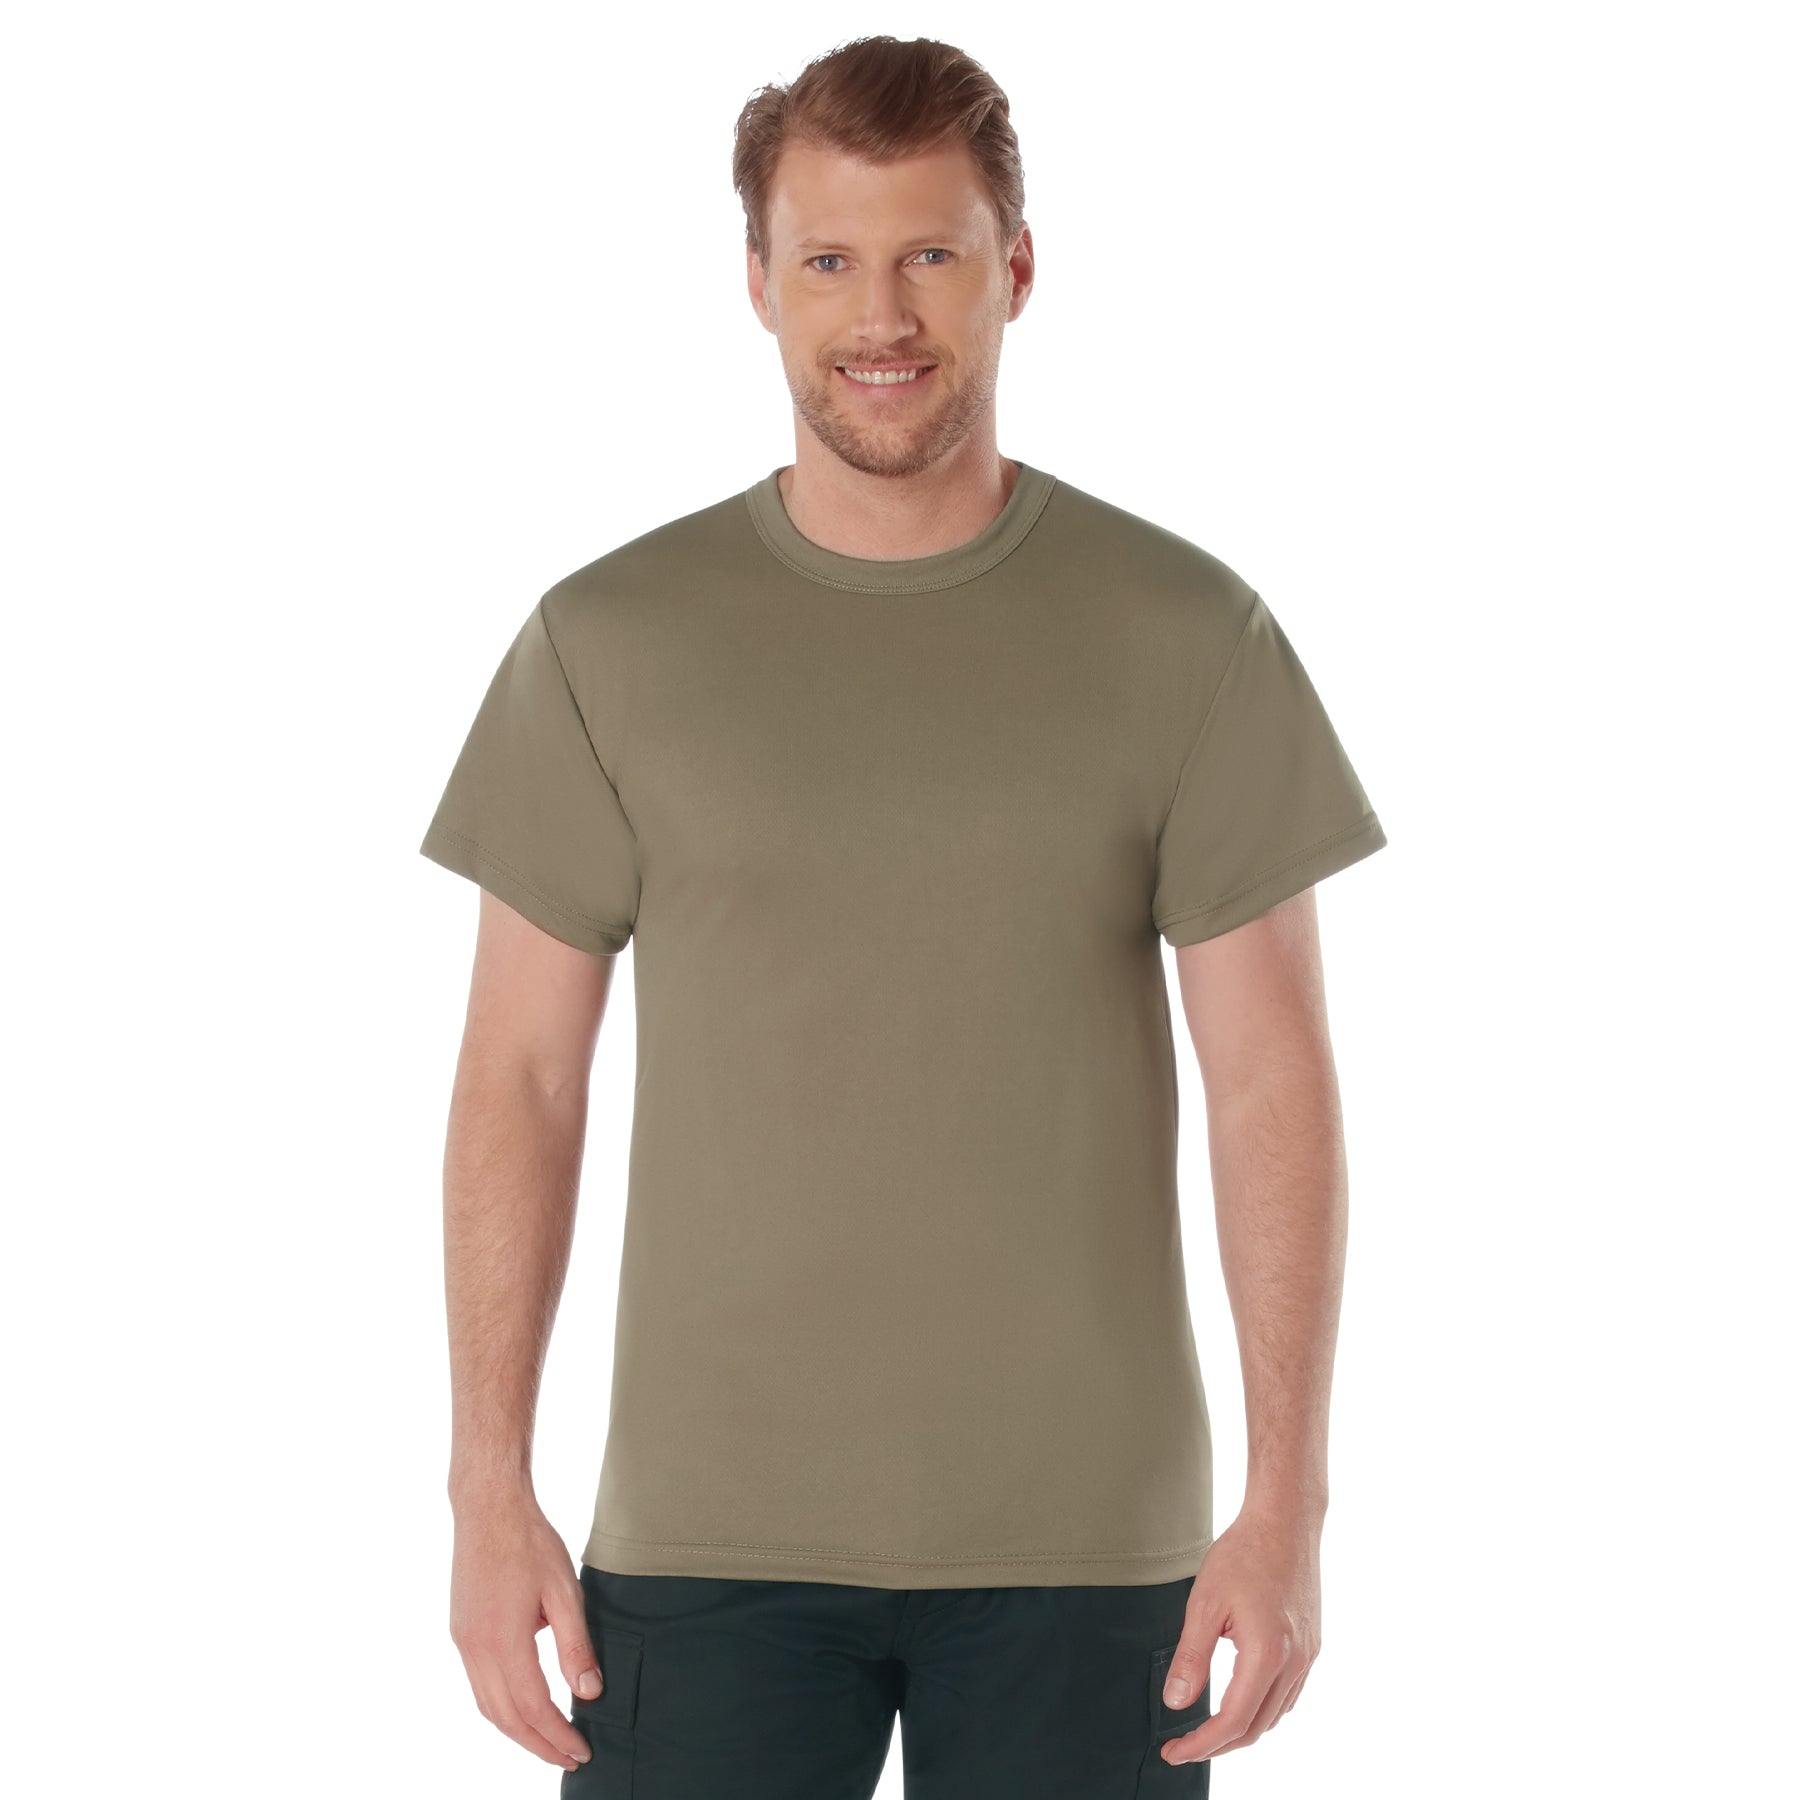 [AR 670-1] Poly Quick Dry Moisture Wicking T-Shirts Coyote Brown AR 670-1